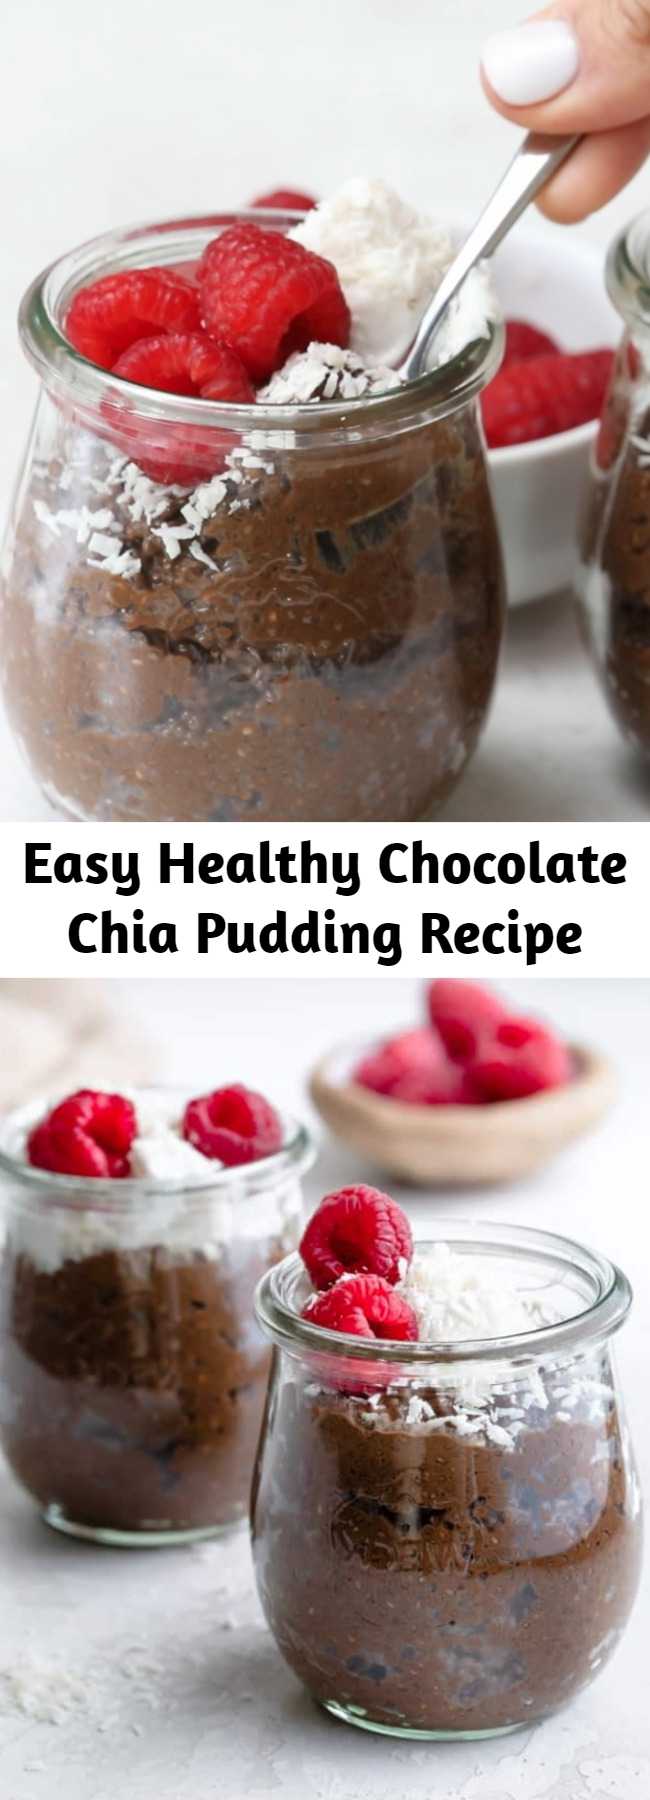 Easy Healthy Chocolate Chia Pudding Recipe - This Chocolate chia seed pudding is made with coconut milk and cocoa powder and is perfect for a healthy and filling breakfast or snack. Deliciously sweet but good for you, and so easy to make ahead of time! Vegan and gluten-free.